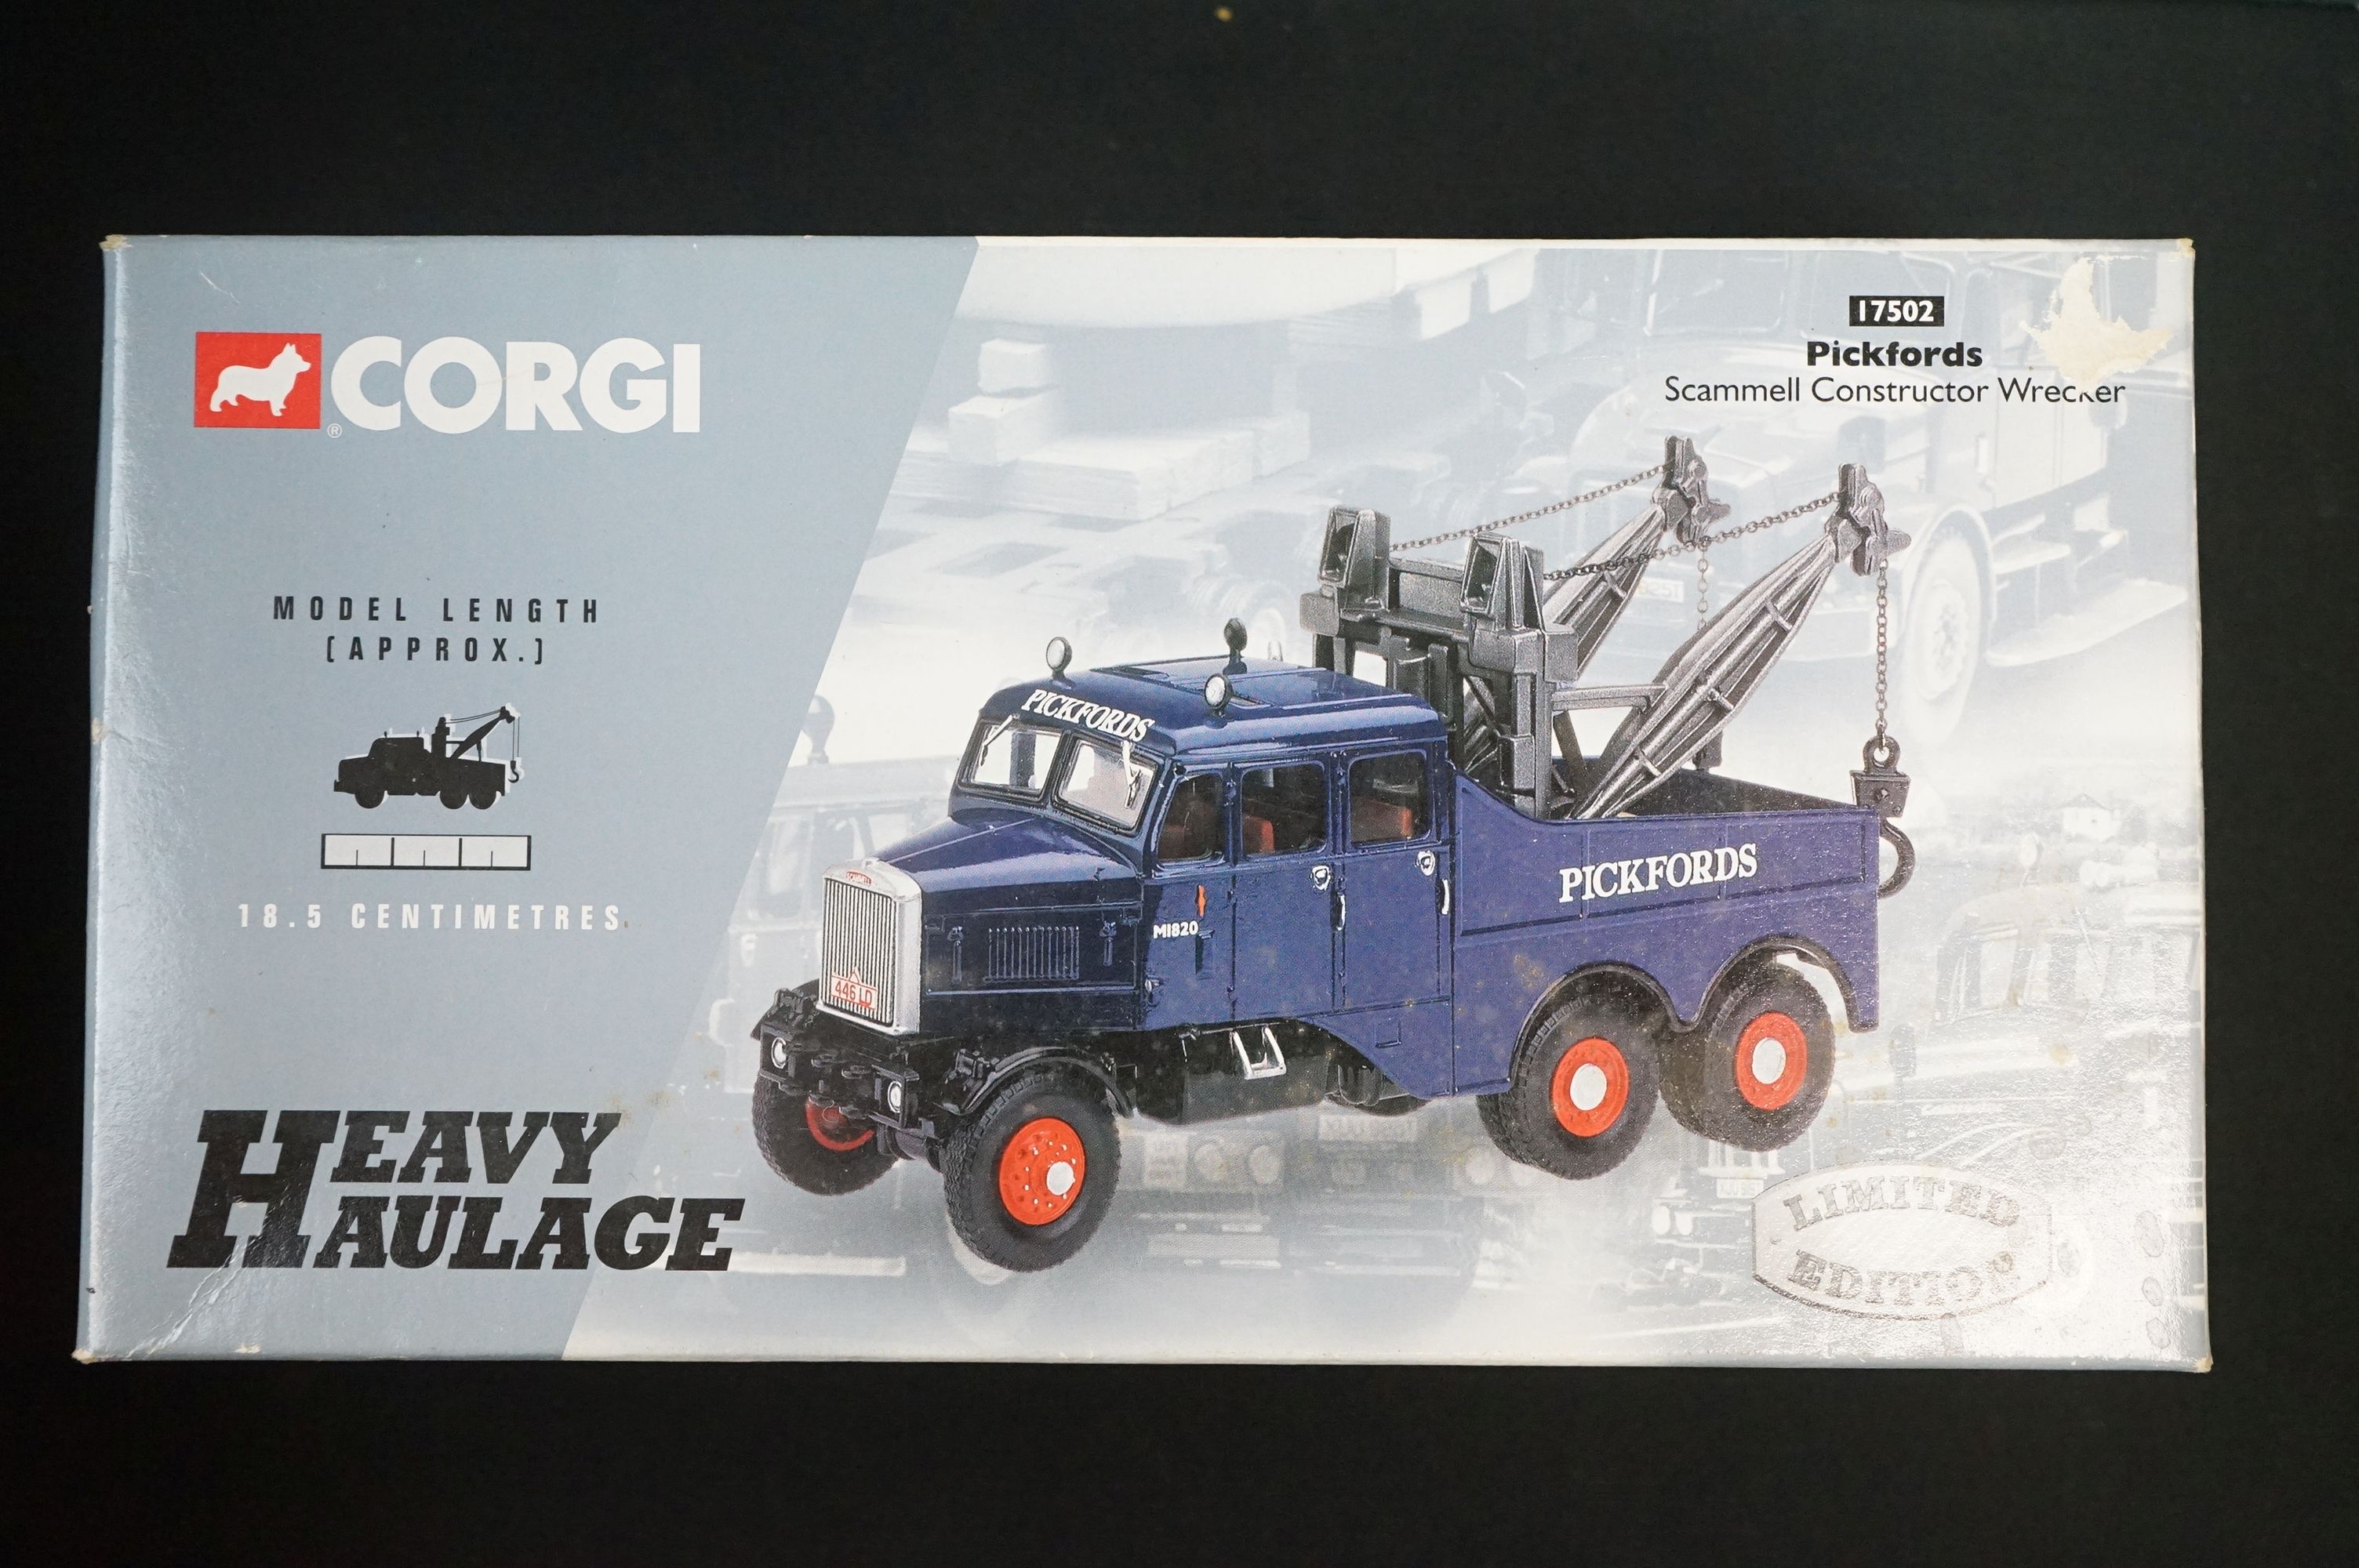 25 Boxed Corgi Classics diecast models to include 5 x Chipperfields Circus (11201 ERF KV Artic - Image 2 of 16